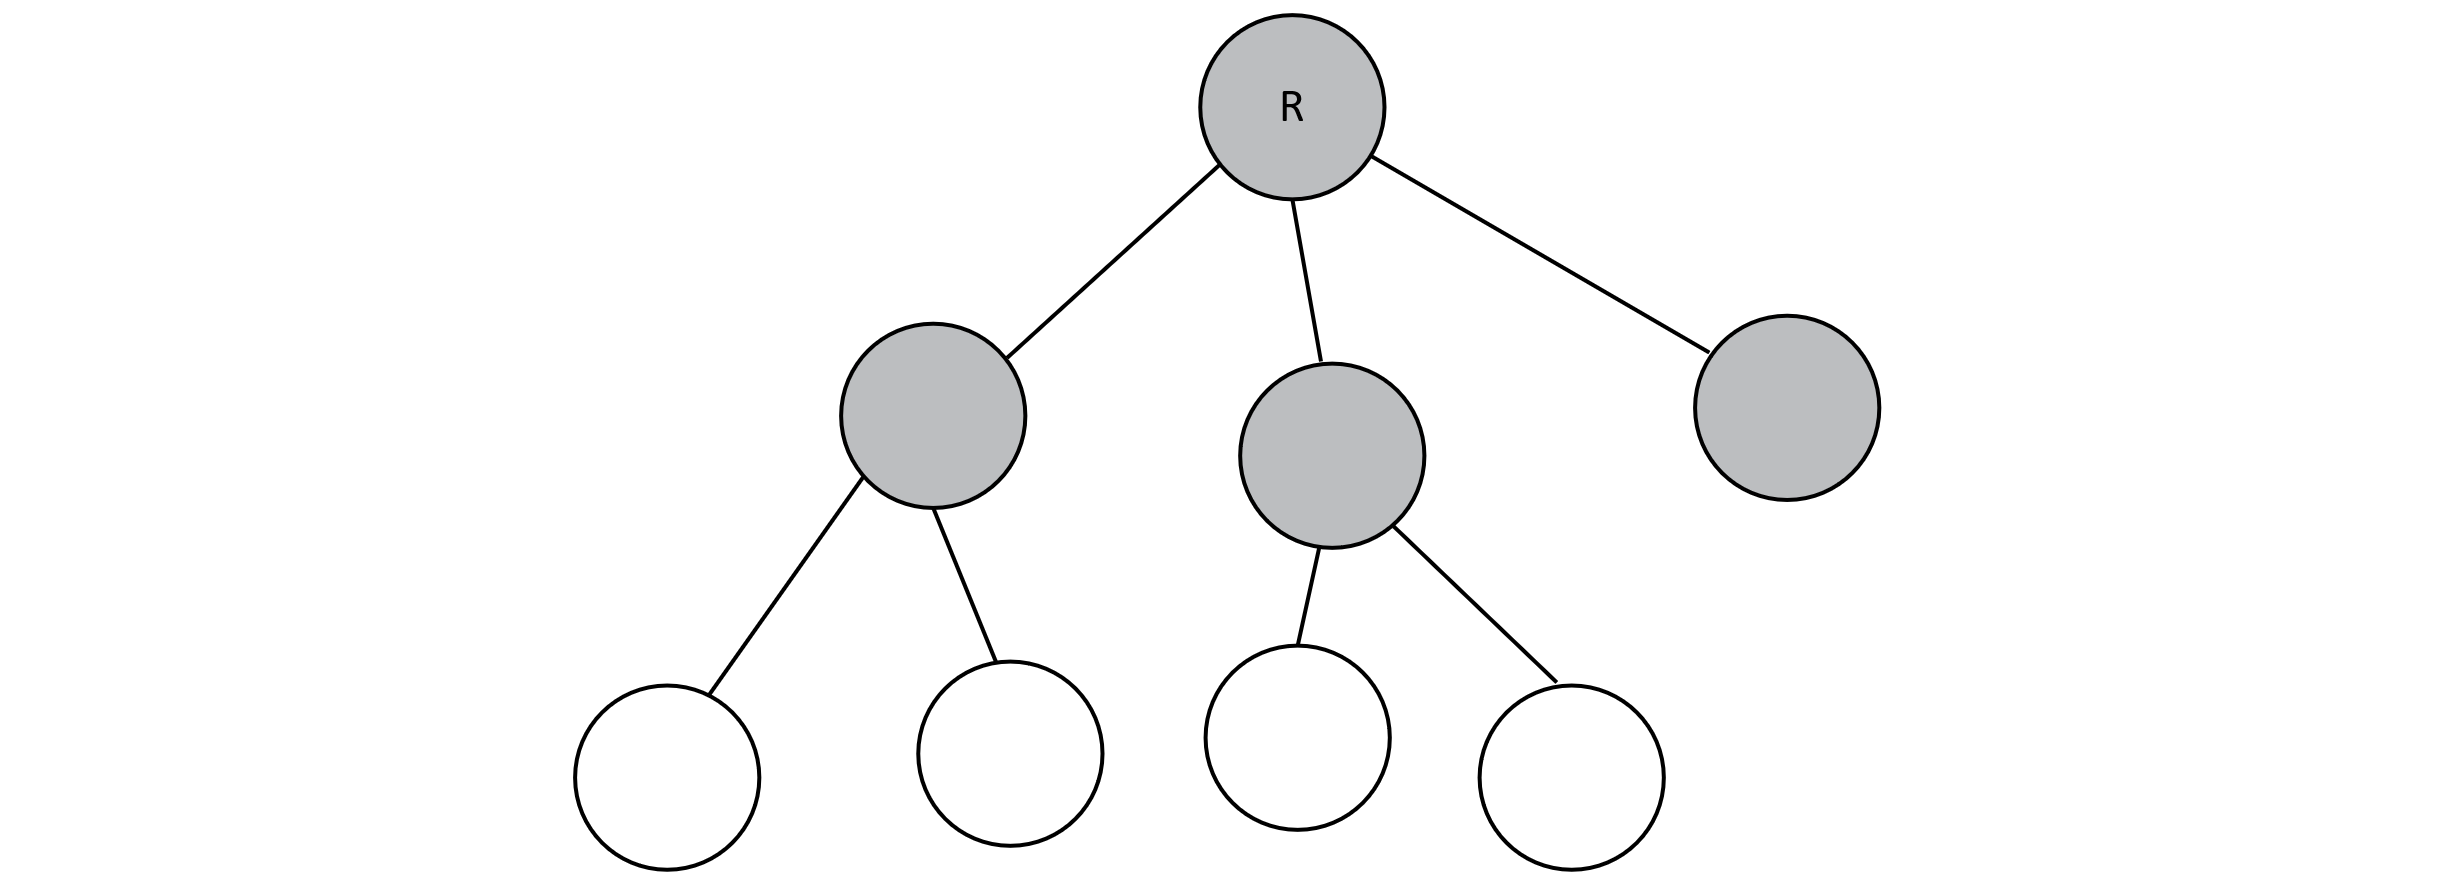 A 3-ary tree in which the root has 3 children. 2 of those children also have two children. The result includes 8 nodes and 7 edges.